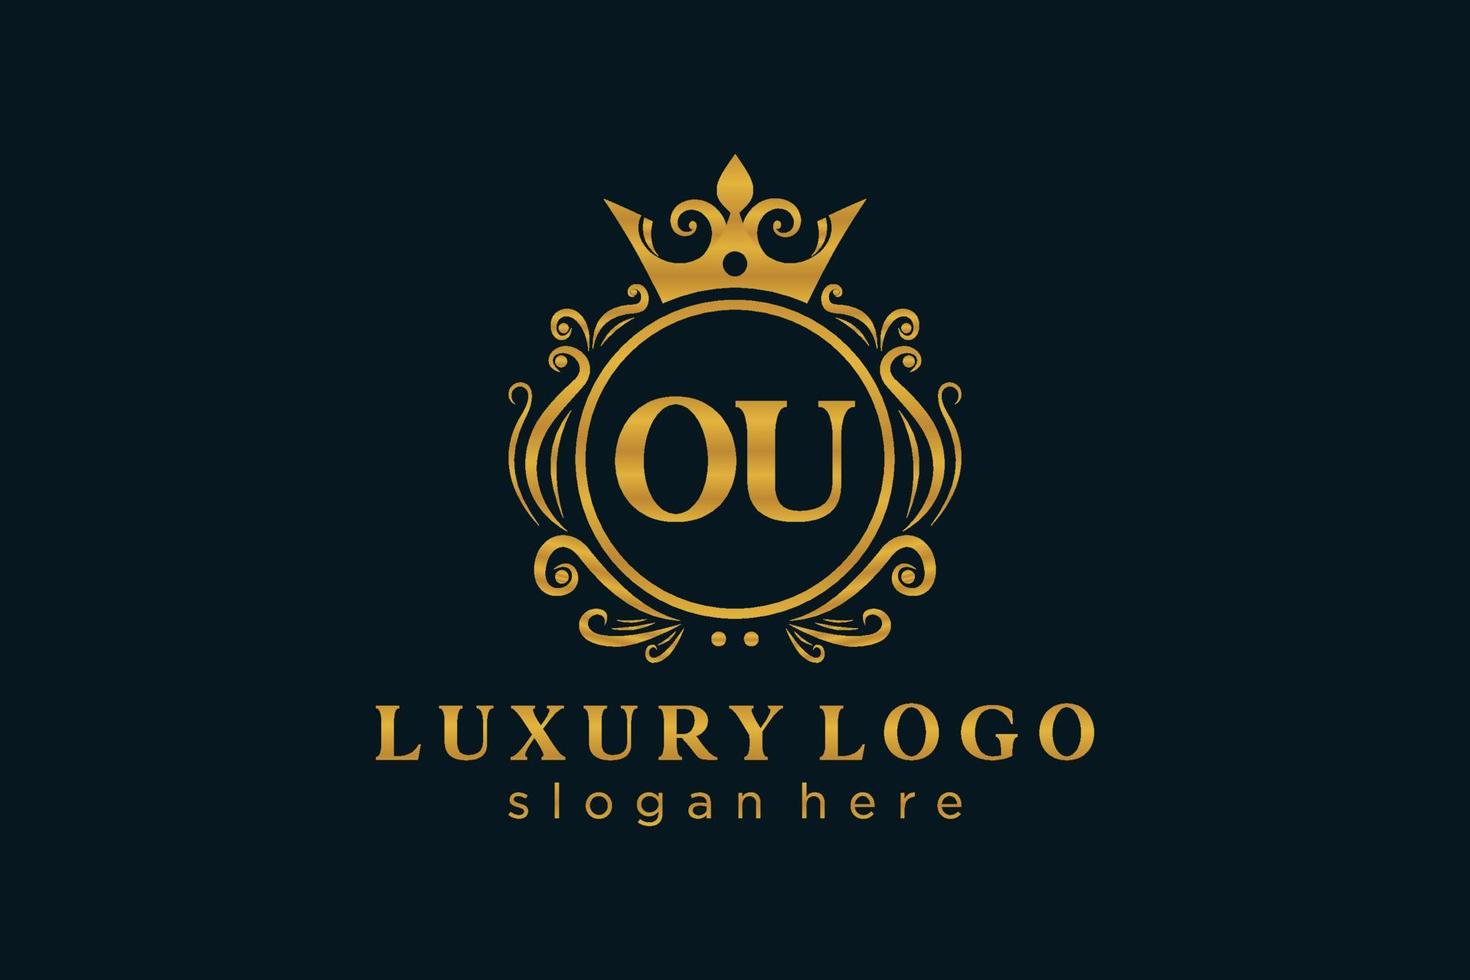 Initial OU Letter Royal Luxury Logo template in vector art for Restaurant, Royalty, Boutique, Cafe, Hotel, Heraldic, Jewelry, Fashion and other vector illustration.